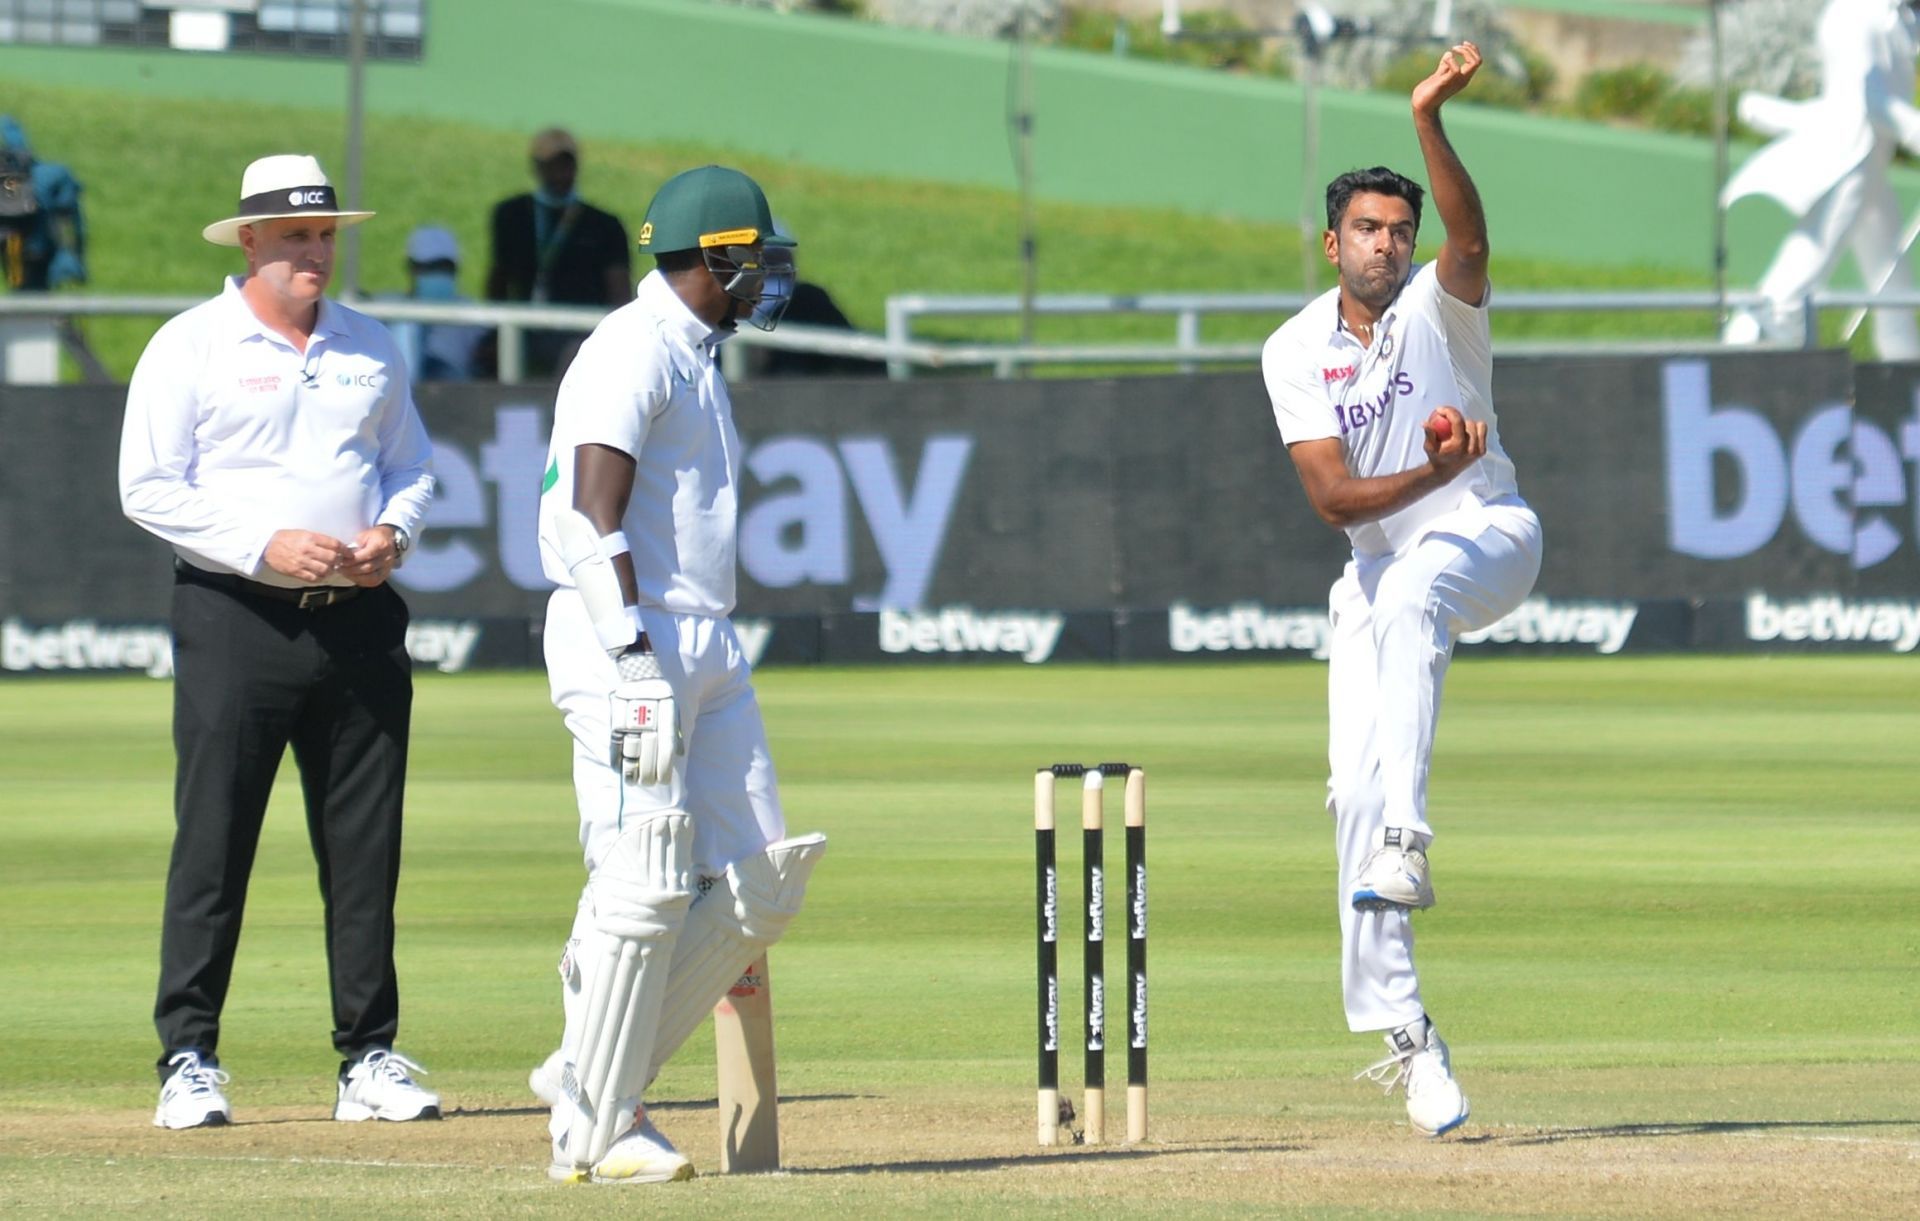 R Ashwin was not at his best in the Test series against South Africa